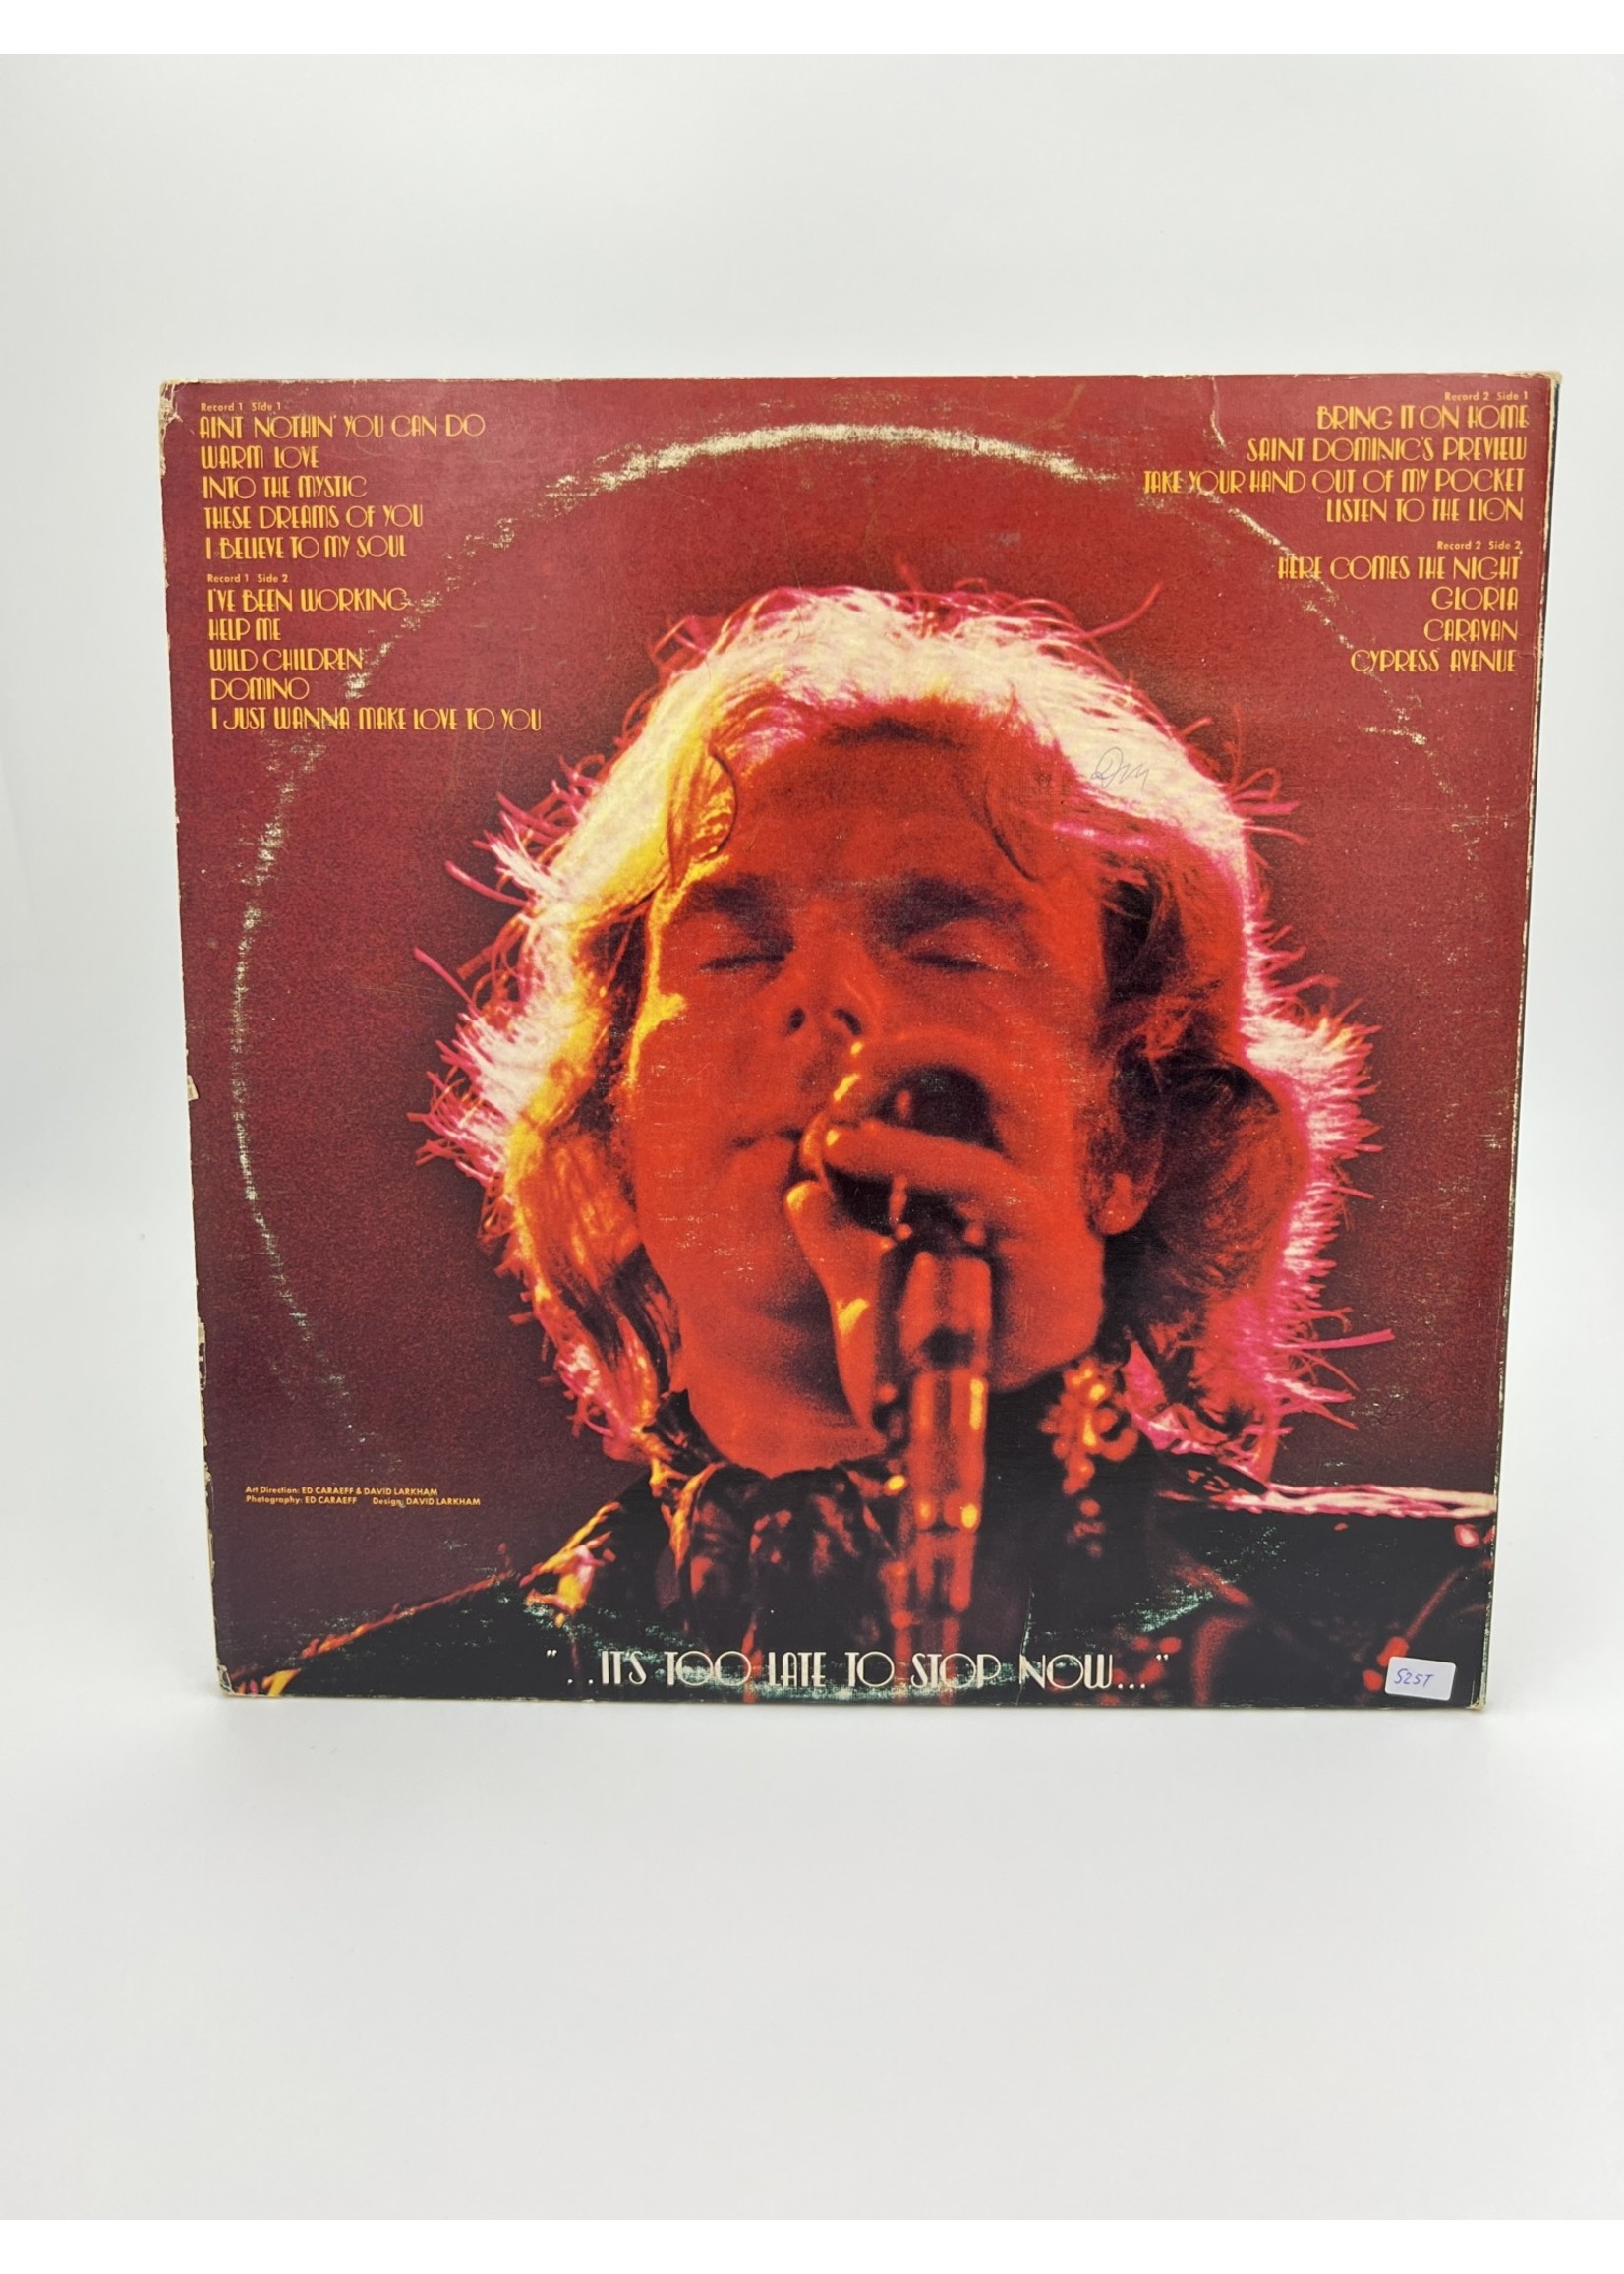 LP Van Morrison Its Too Late To Stop Now LP 2 RECORD